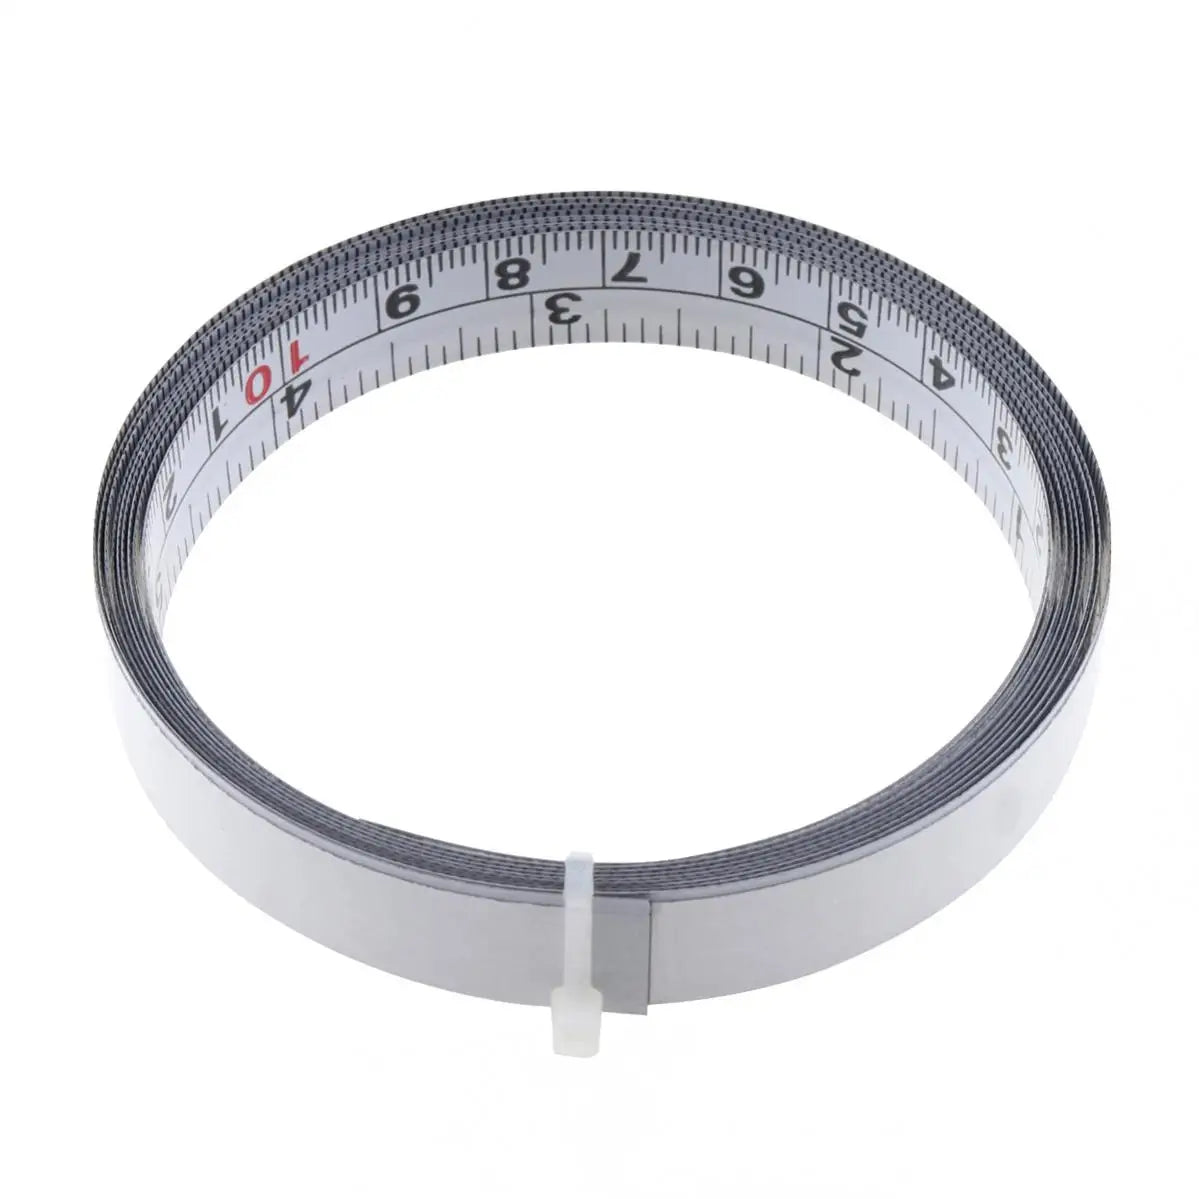 200cm Self-Adhesive Measuring Tape Steel Workbench Ruler mm/inch Left Right Reading Tool